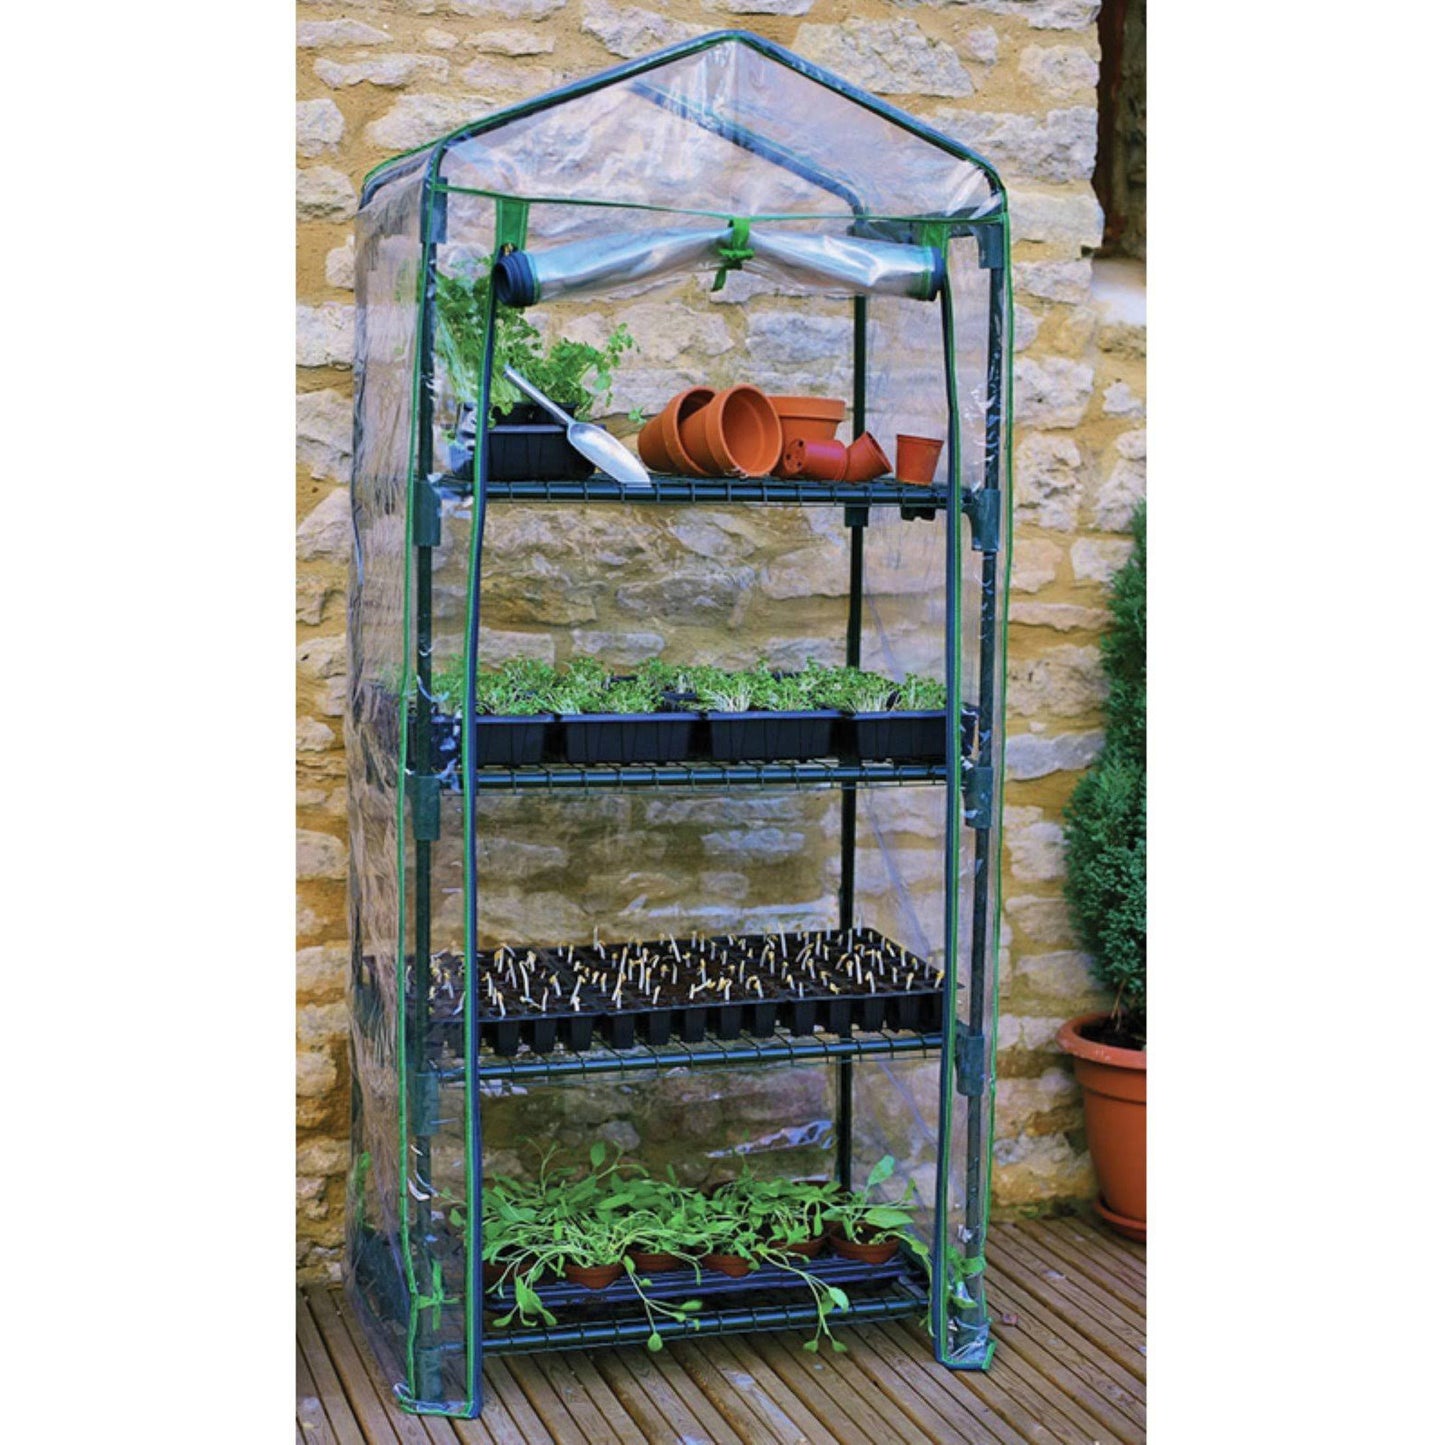 GENESIS 4 Tier Portable Rolling Greenhouse with Clear Cover GEN-4PVC